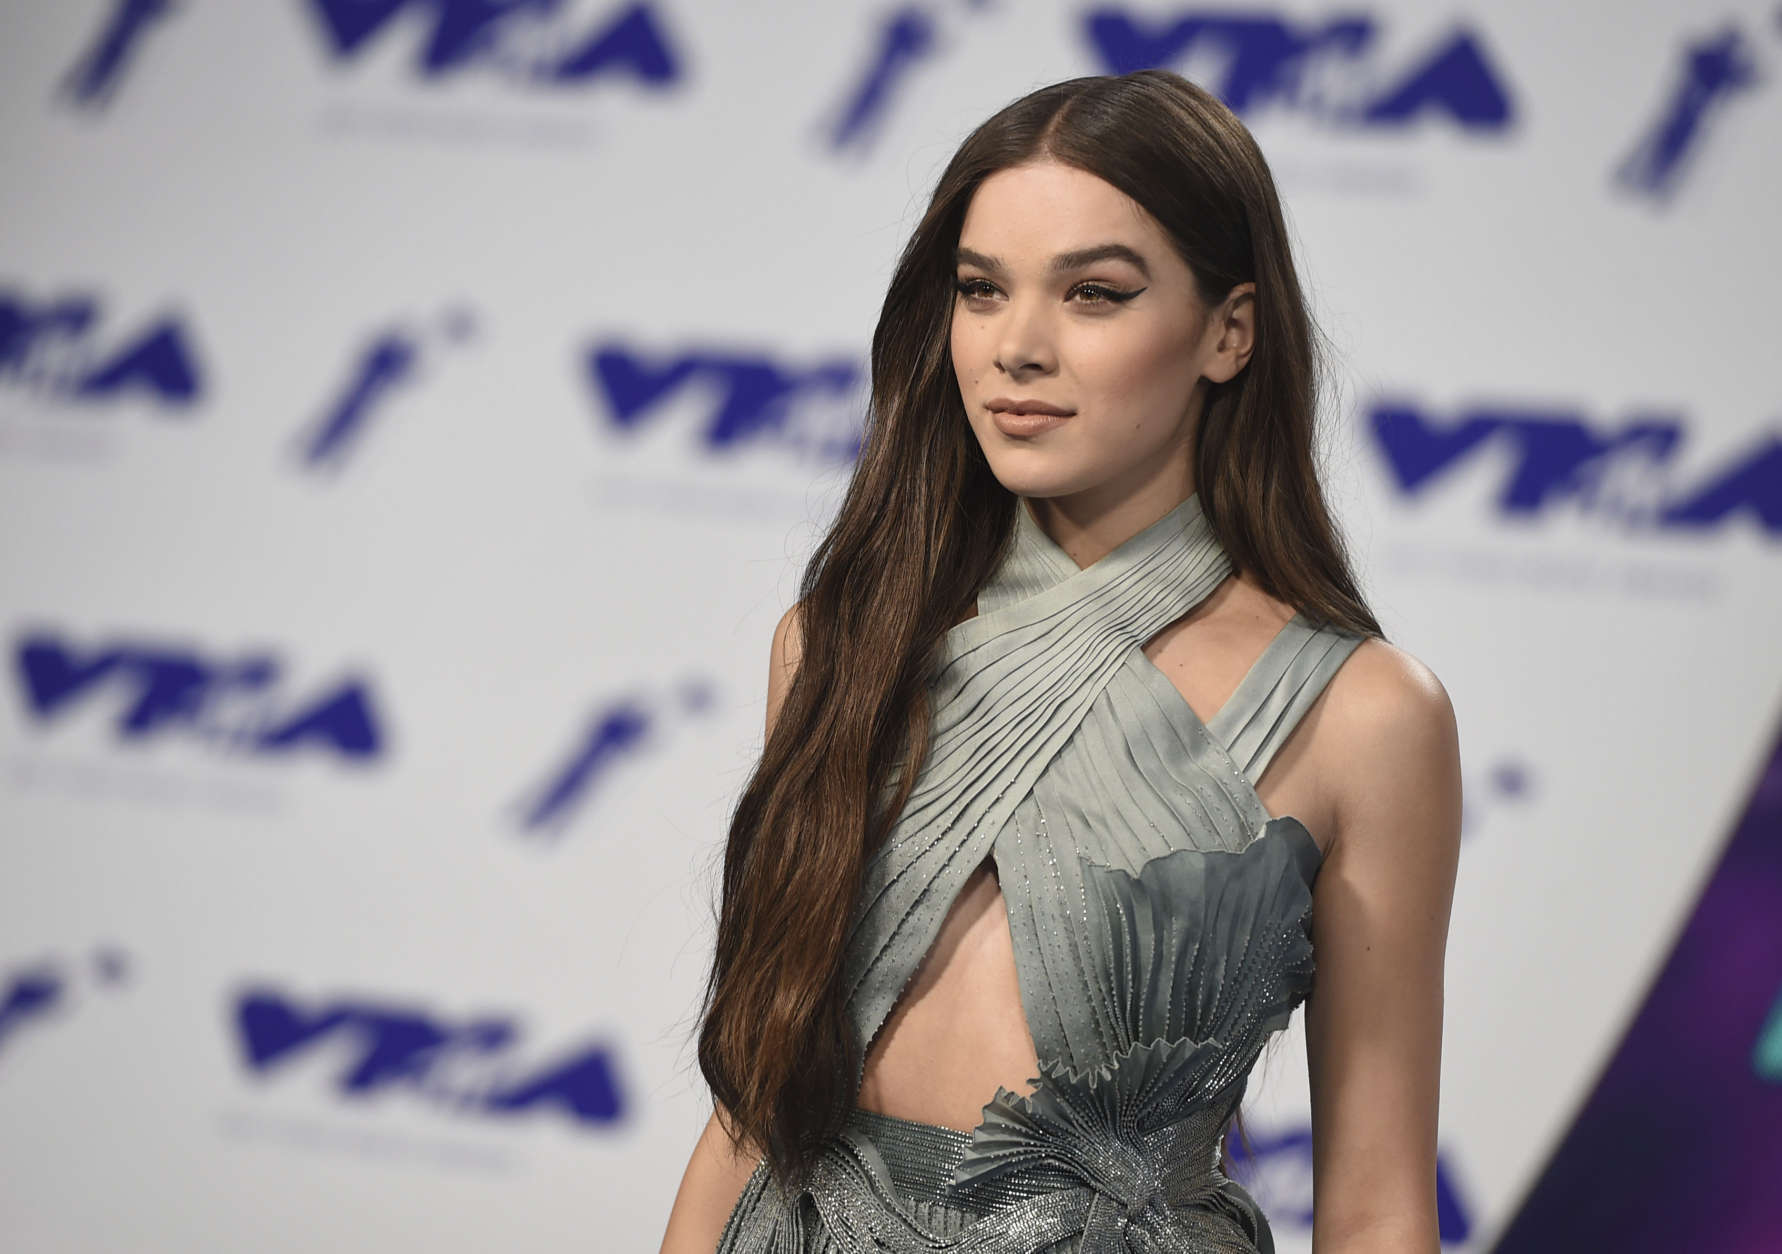 Hailee Steinfeld arrives at the MTV Video Music Awards at The Forum on Sunday, Aug. 27, 2017, in Inglewood, Calif. (Photo by Jordan Strauss/Invision/AP)